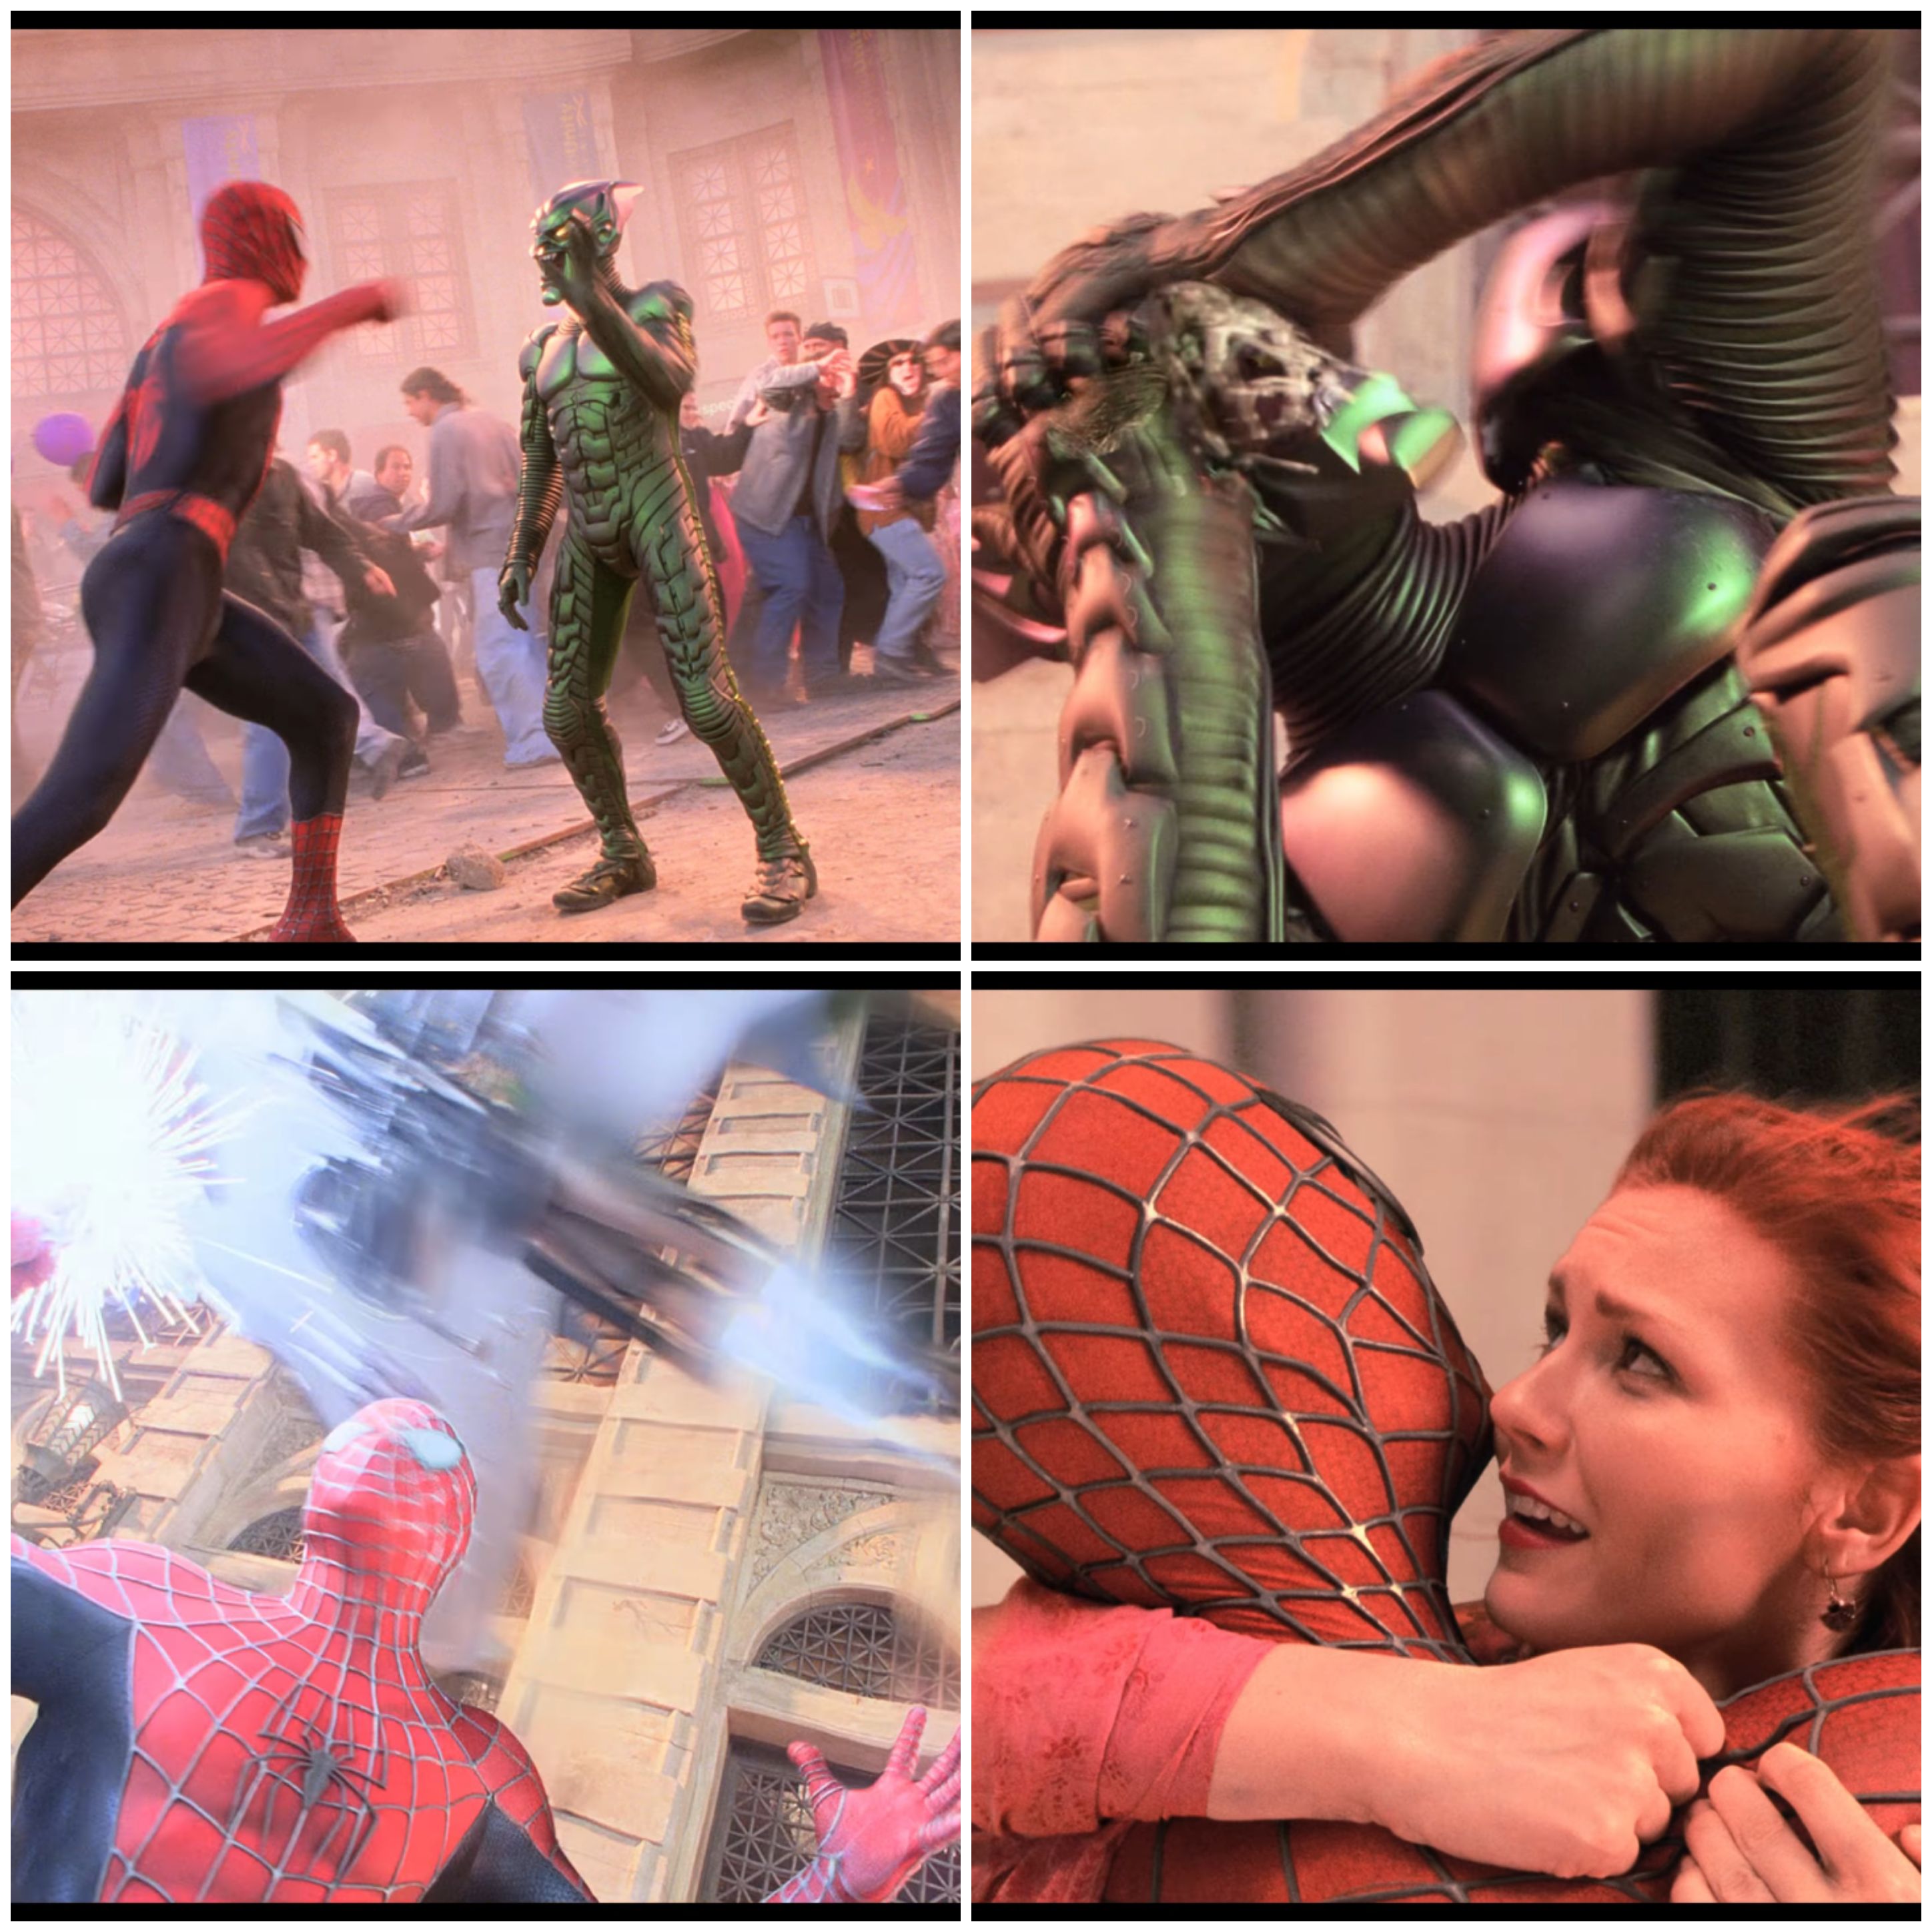 A ranking of the live-action “Spider-Man” films - Pipe Dream